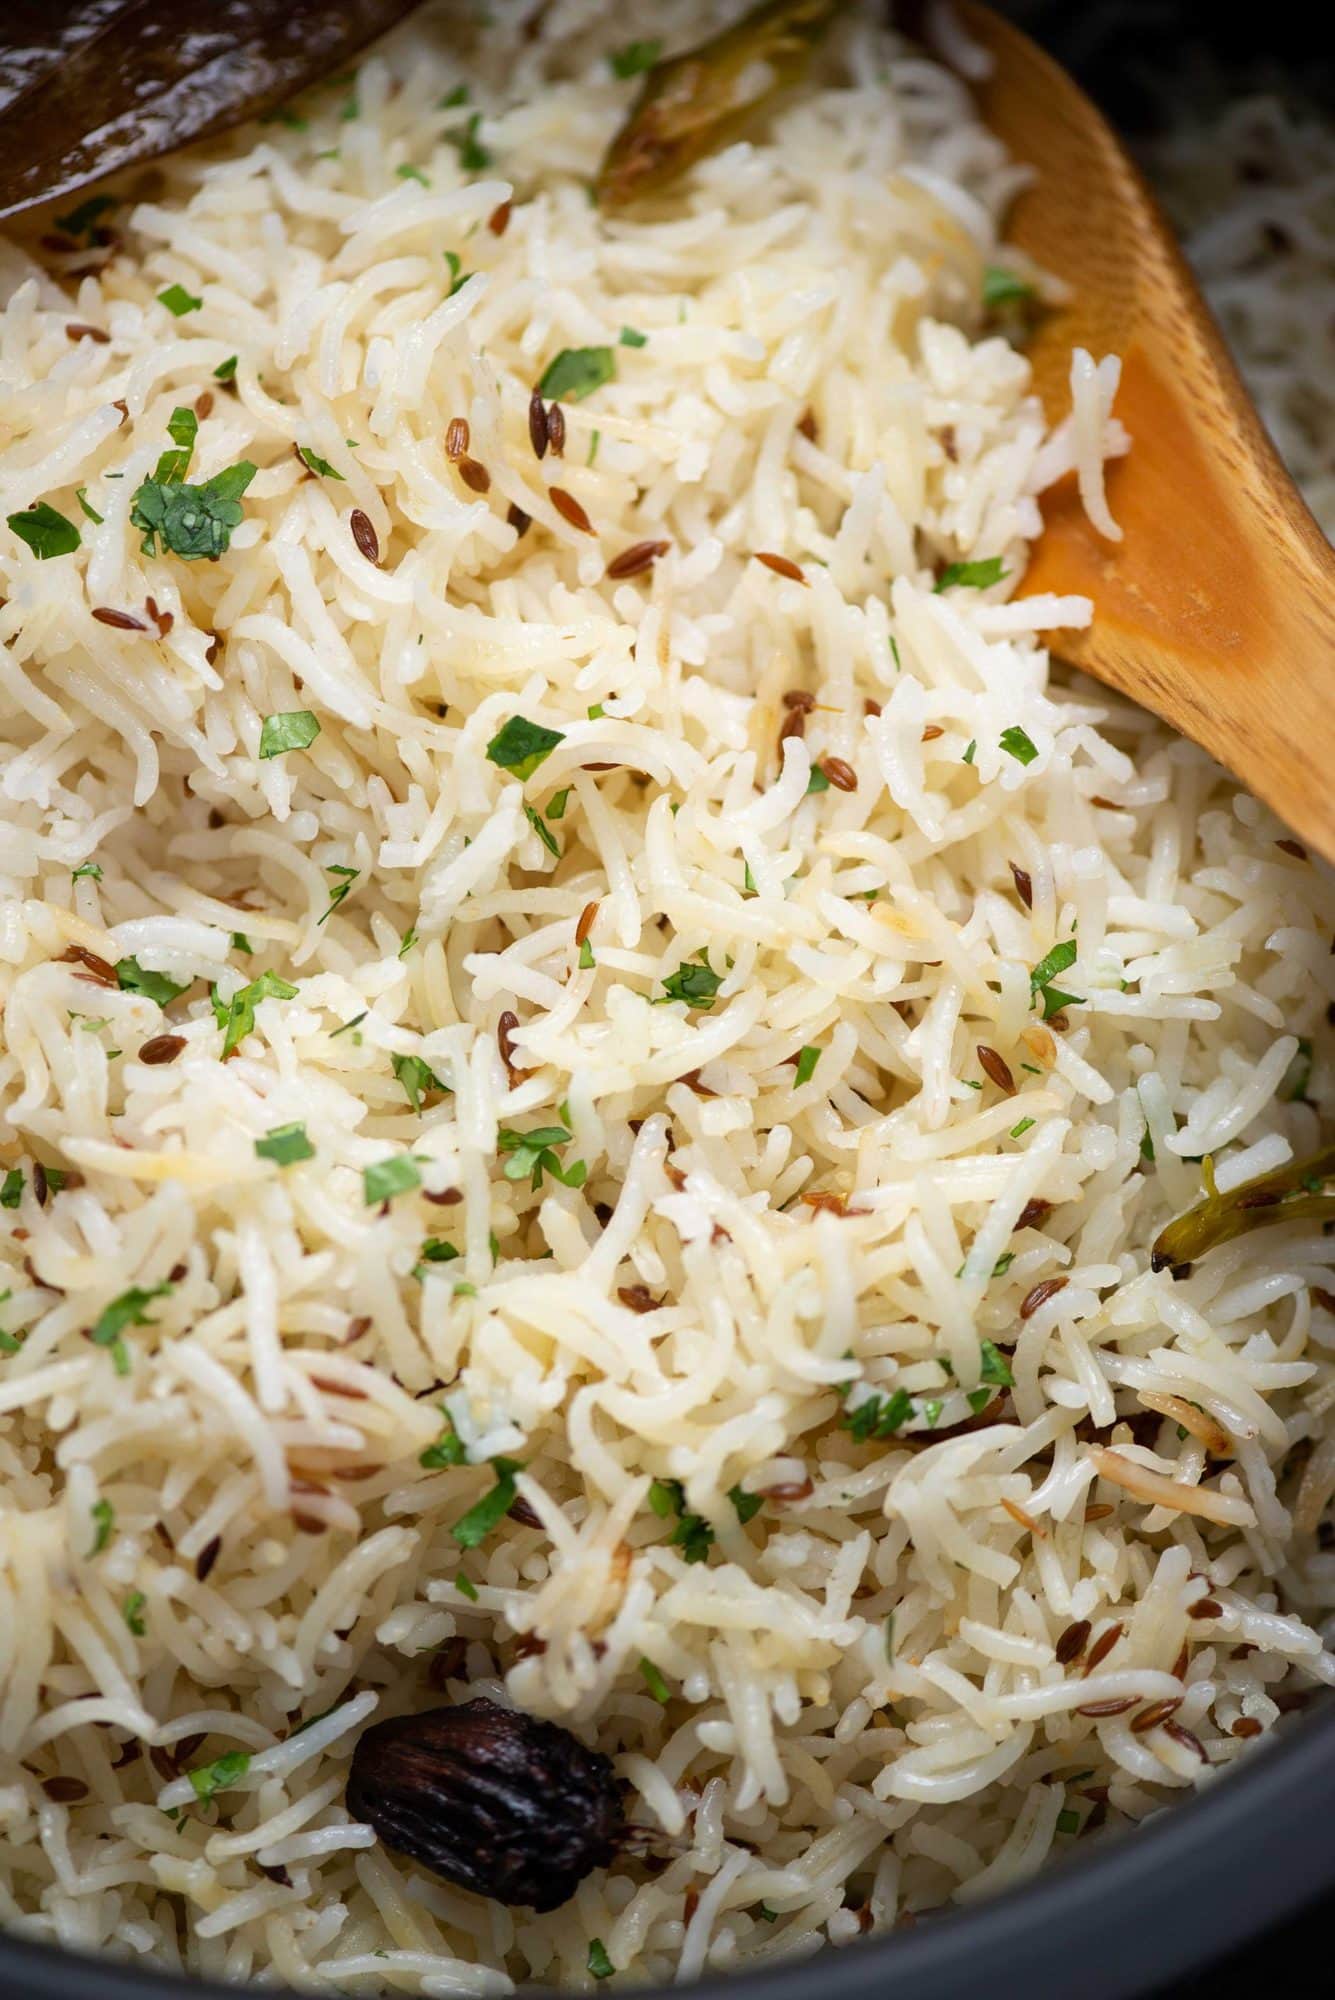 Close up view of jeera rice with a ladle. Jeera rice has cumin, onions, chillies and chopped coriander leaves shown.